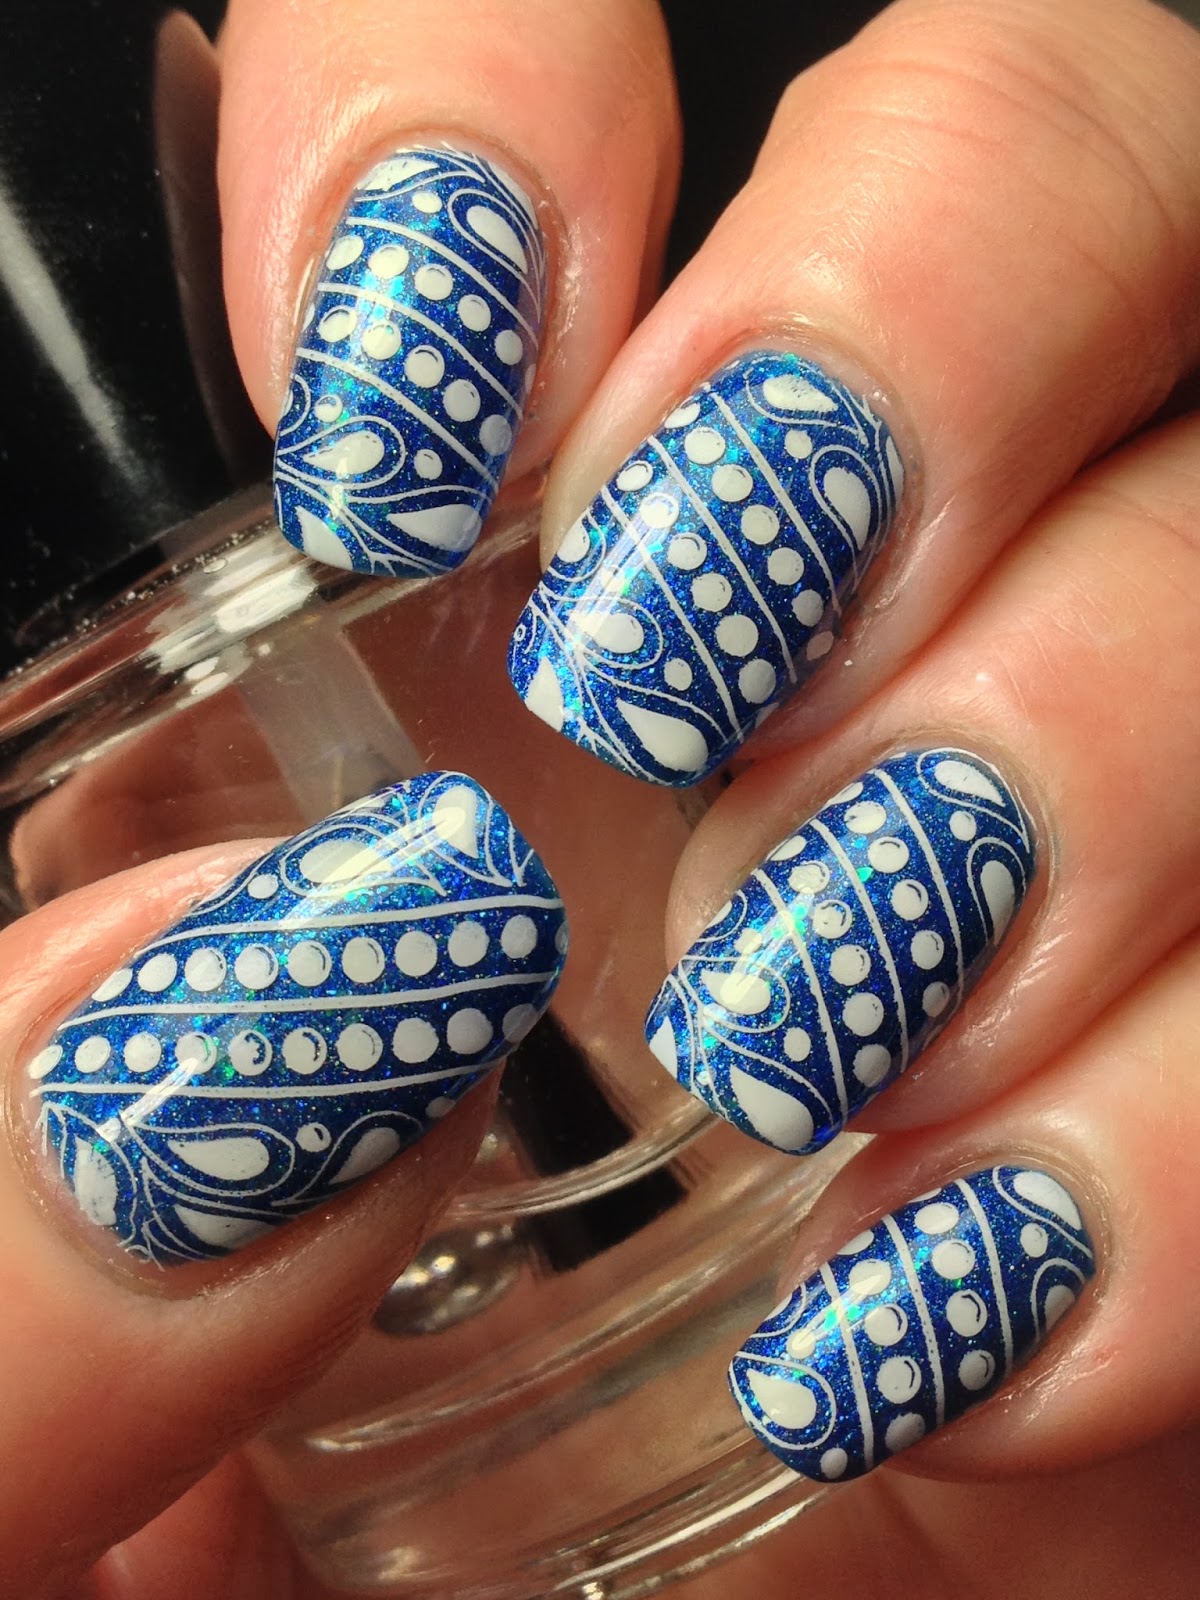 ShowScratch Creative Nail Challenge: Things that inspire you – Scratch